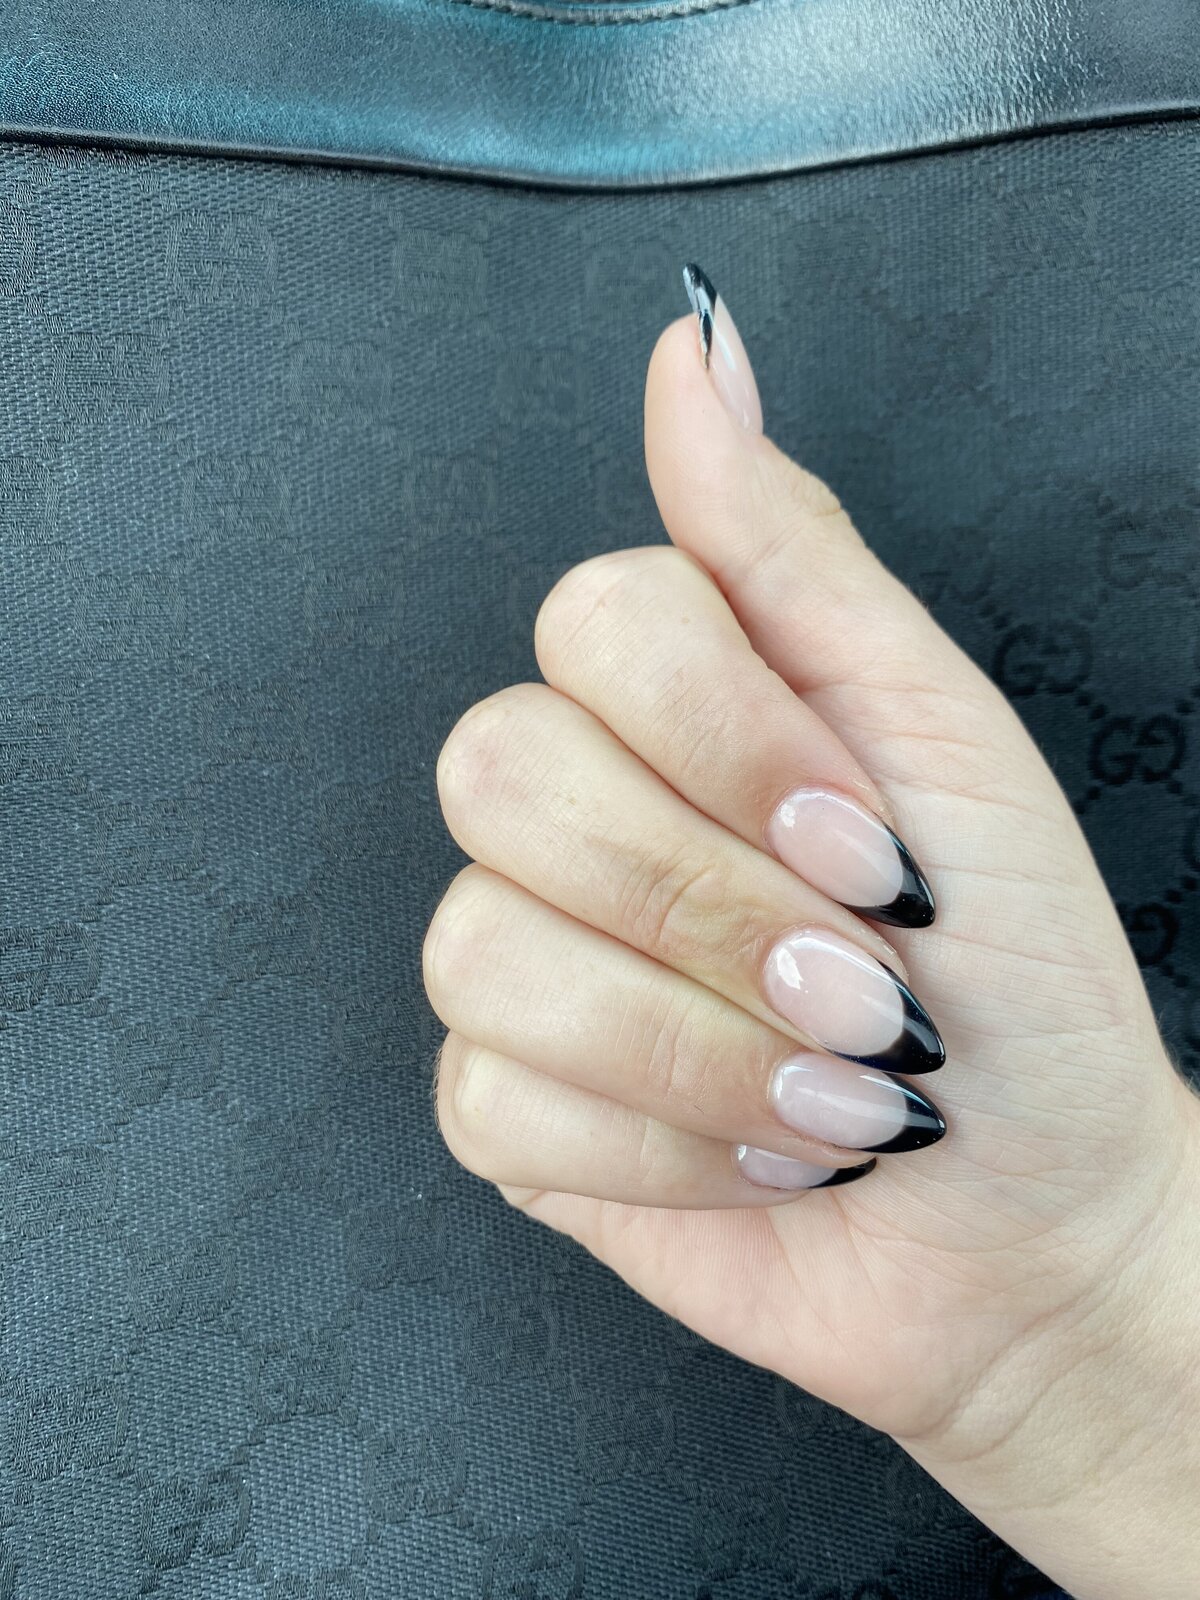 Woman's hands with black painted nail tips